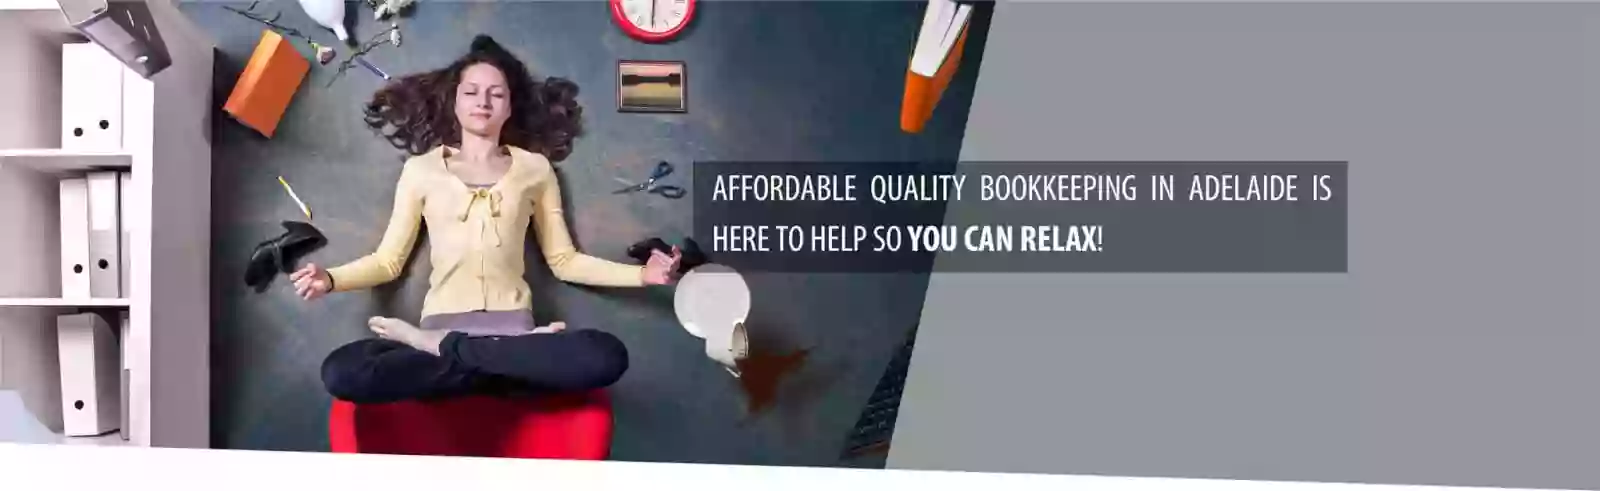 Affordable Quality Bookkeeping | Xero bookkeeper Adelaide | Bookkeeper Adelaide